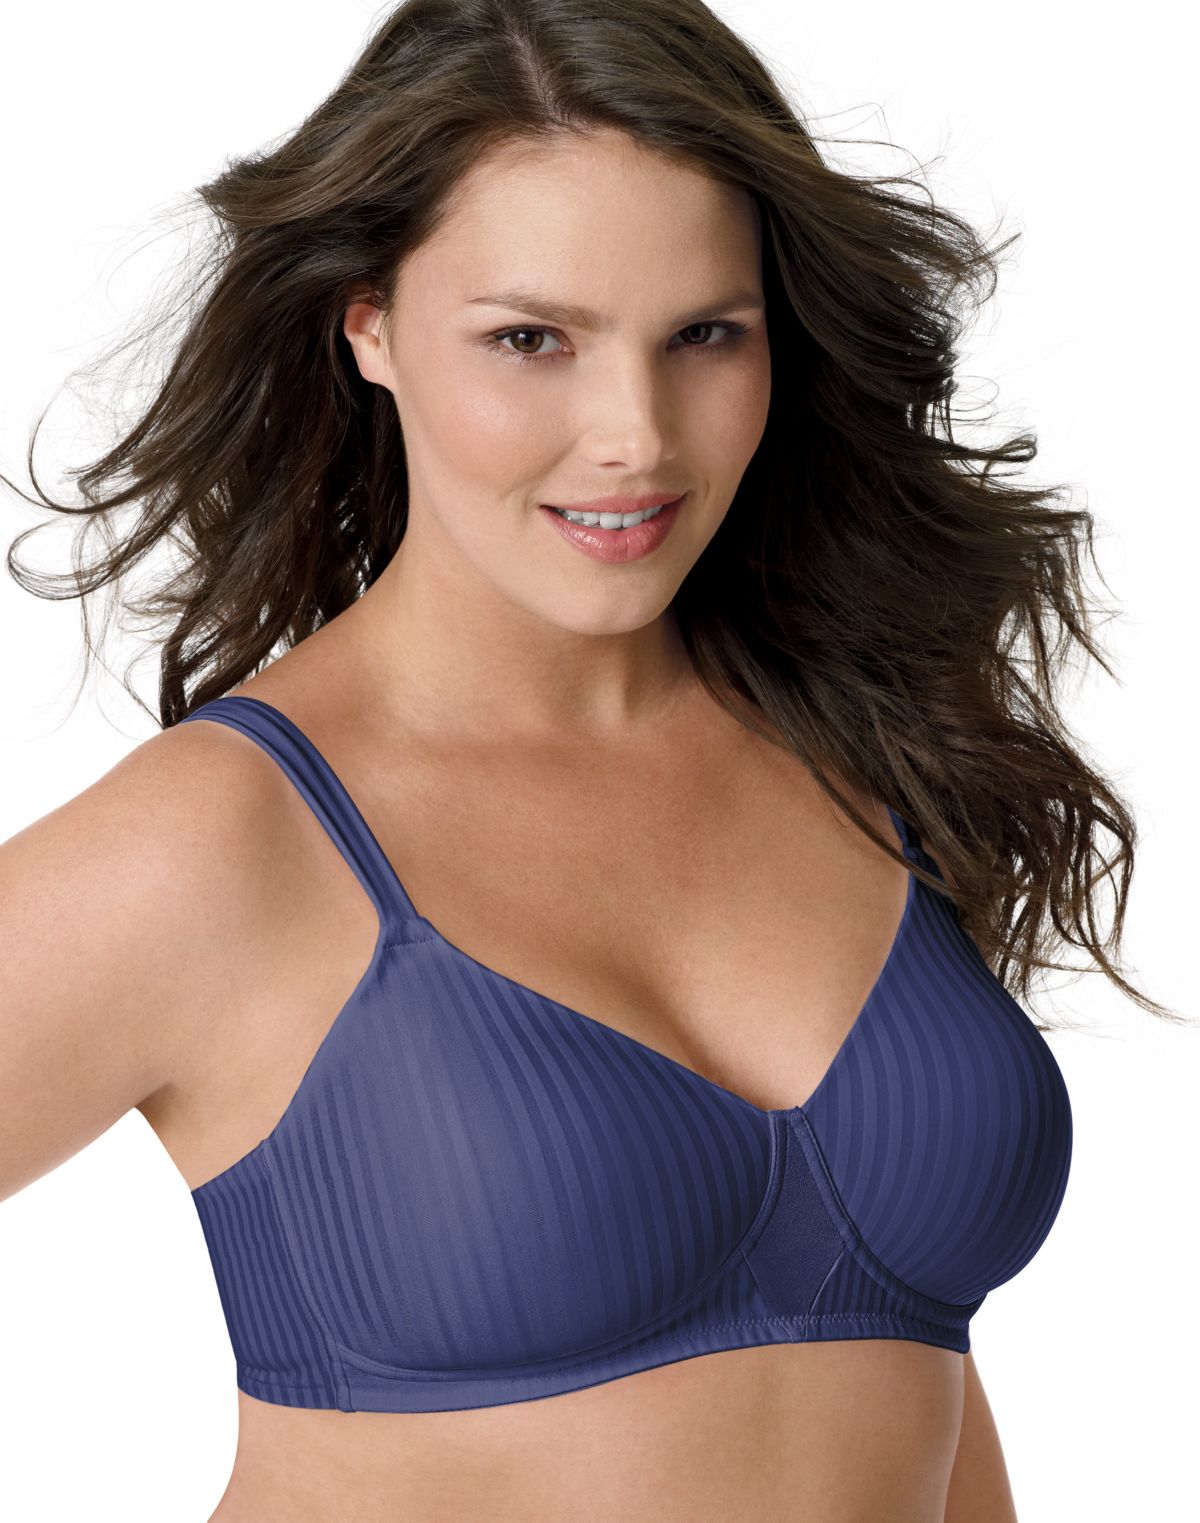 Women's Playtex Secrets Bras for sale, Shop with Afterpay